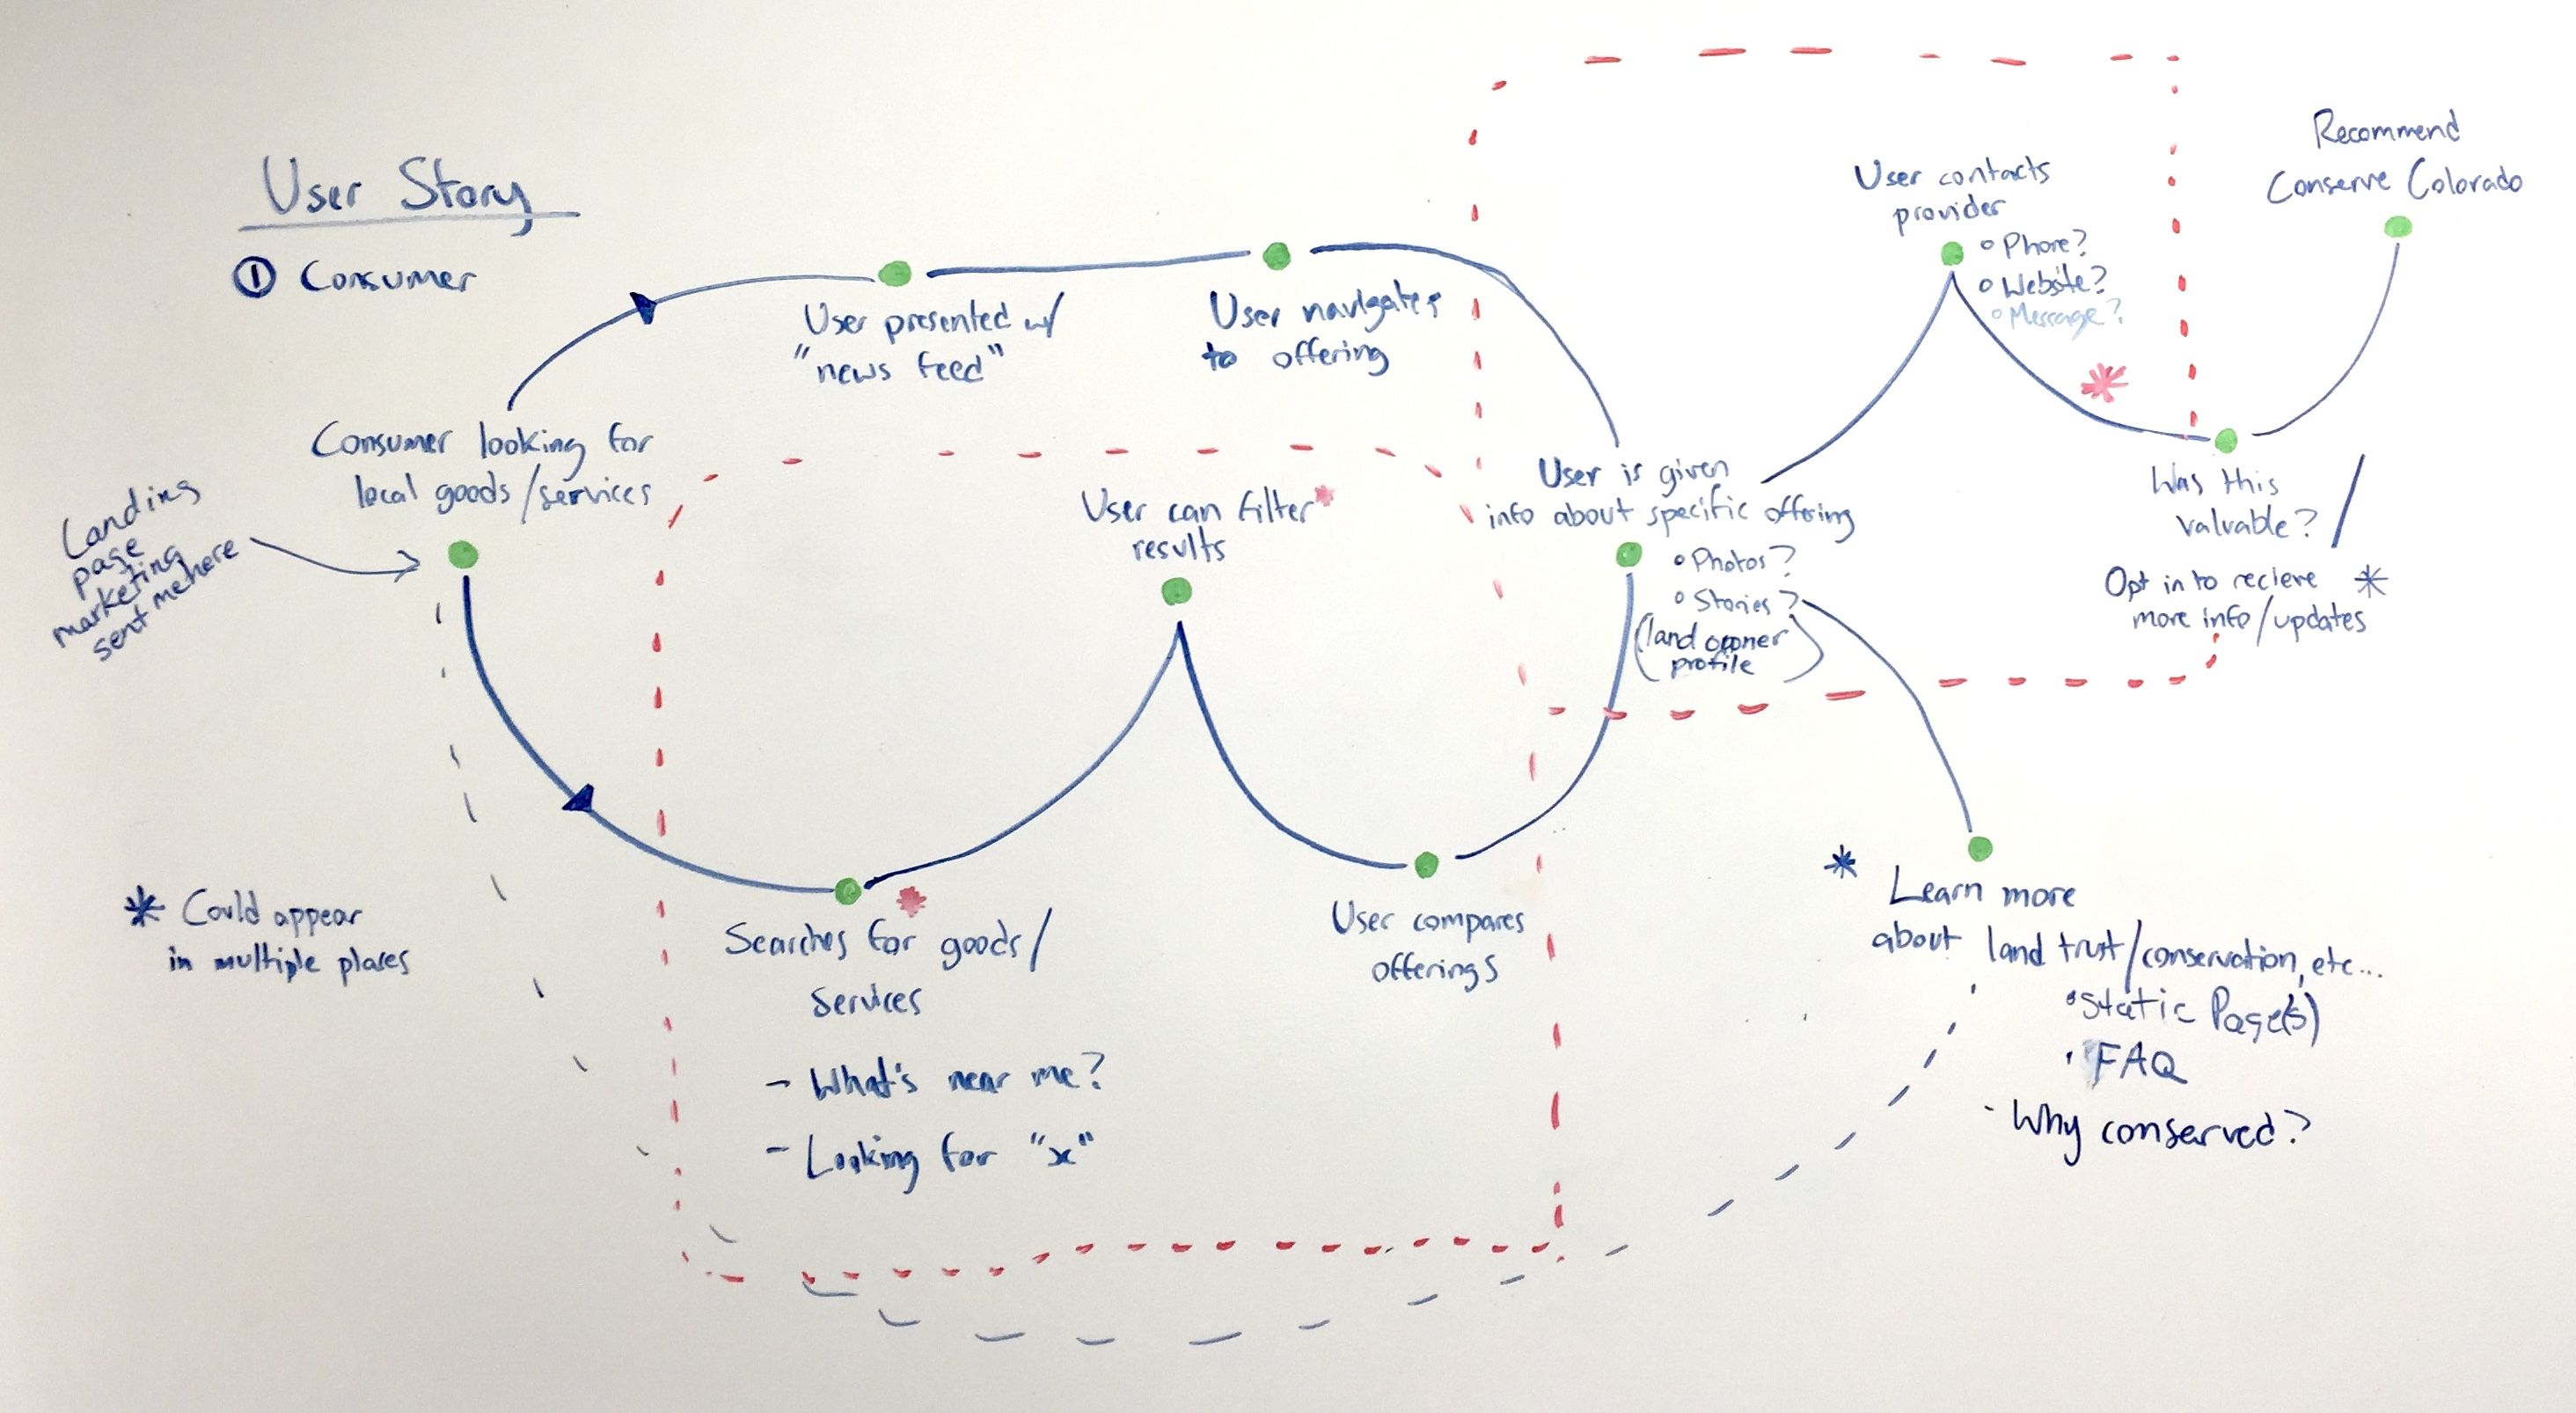 A sketch of the journey a user would take through a website or app